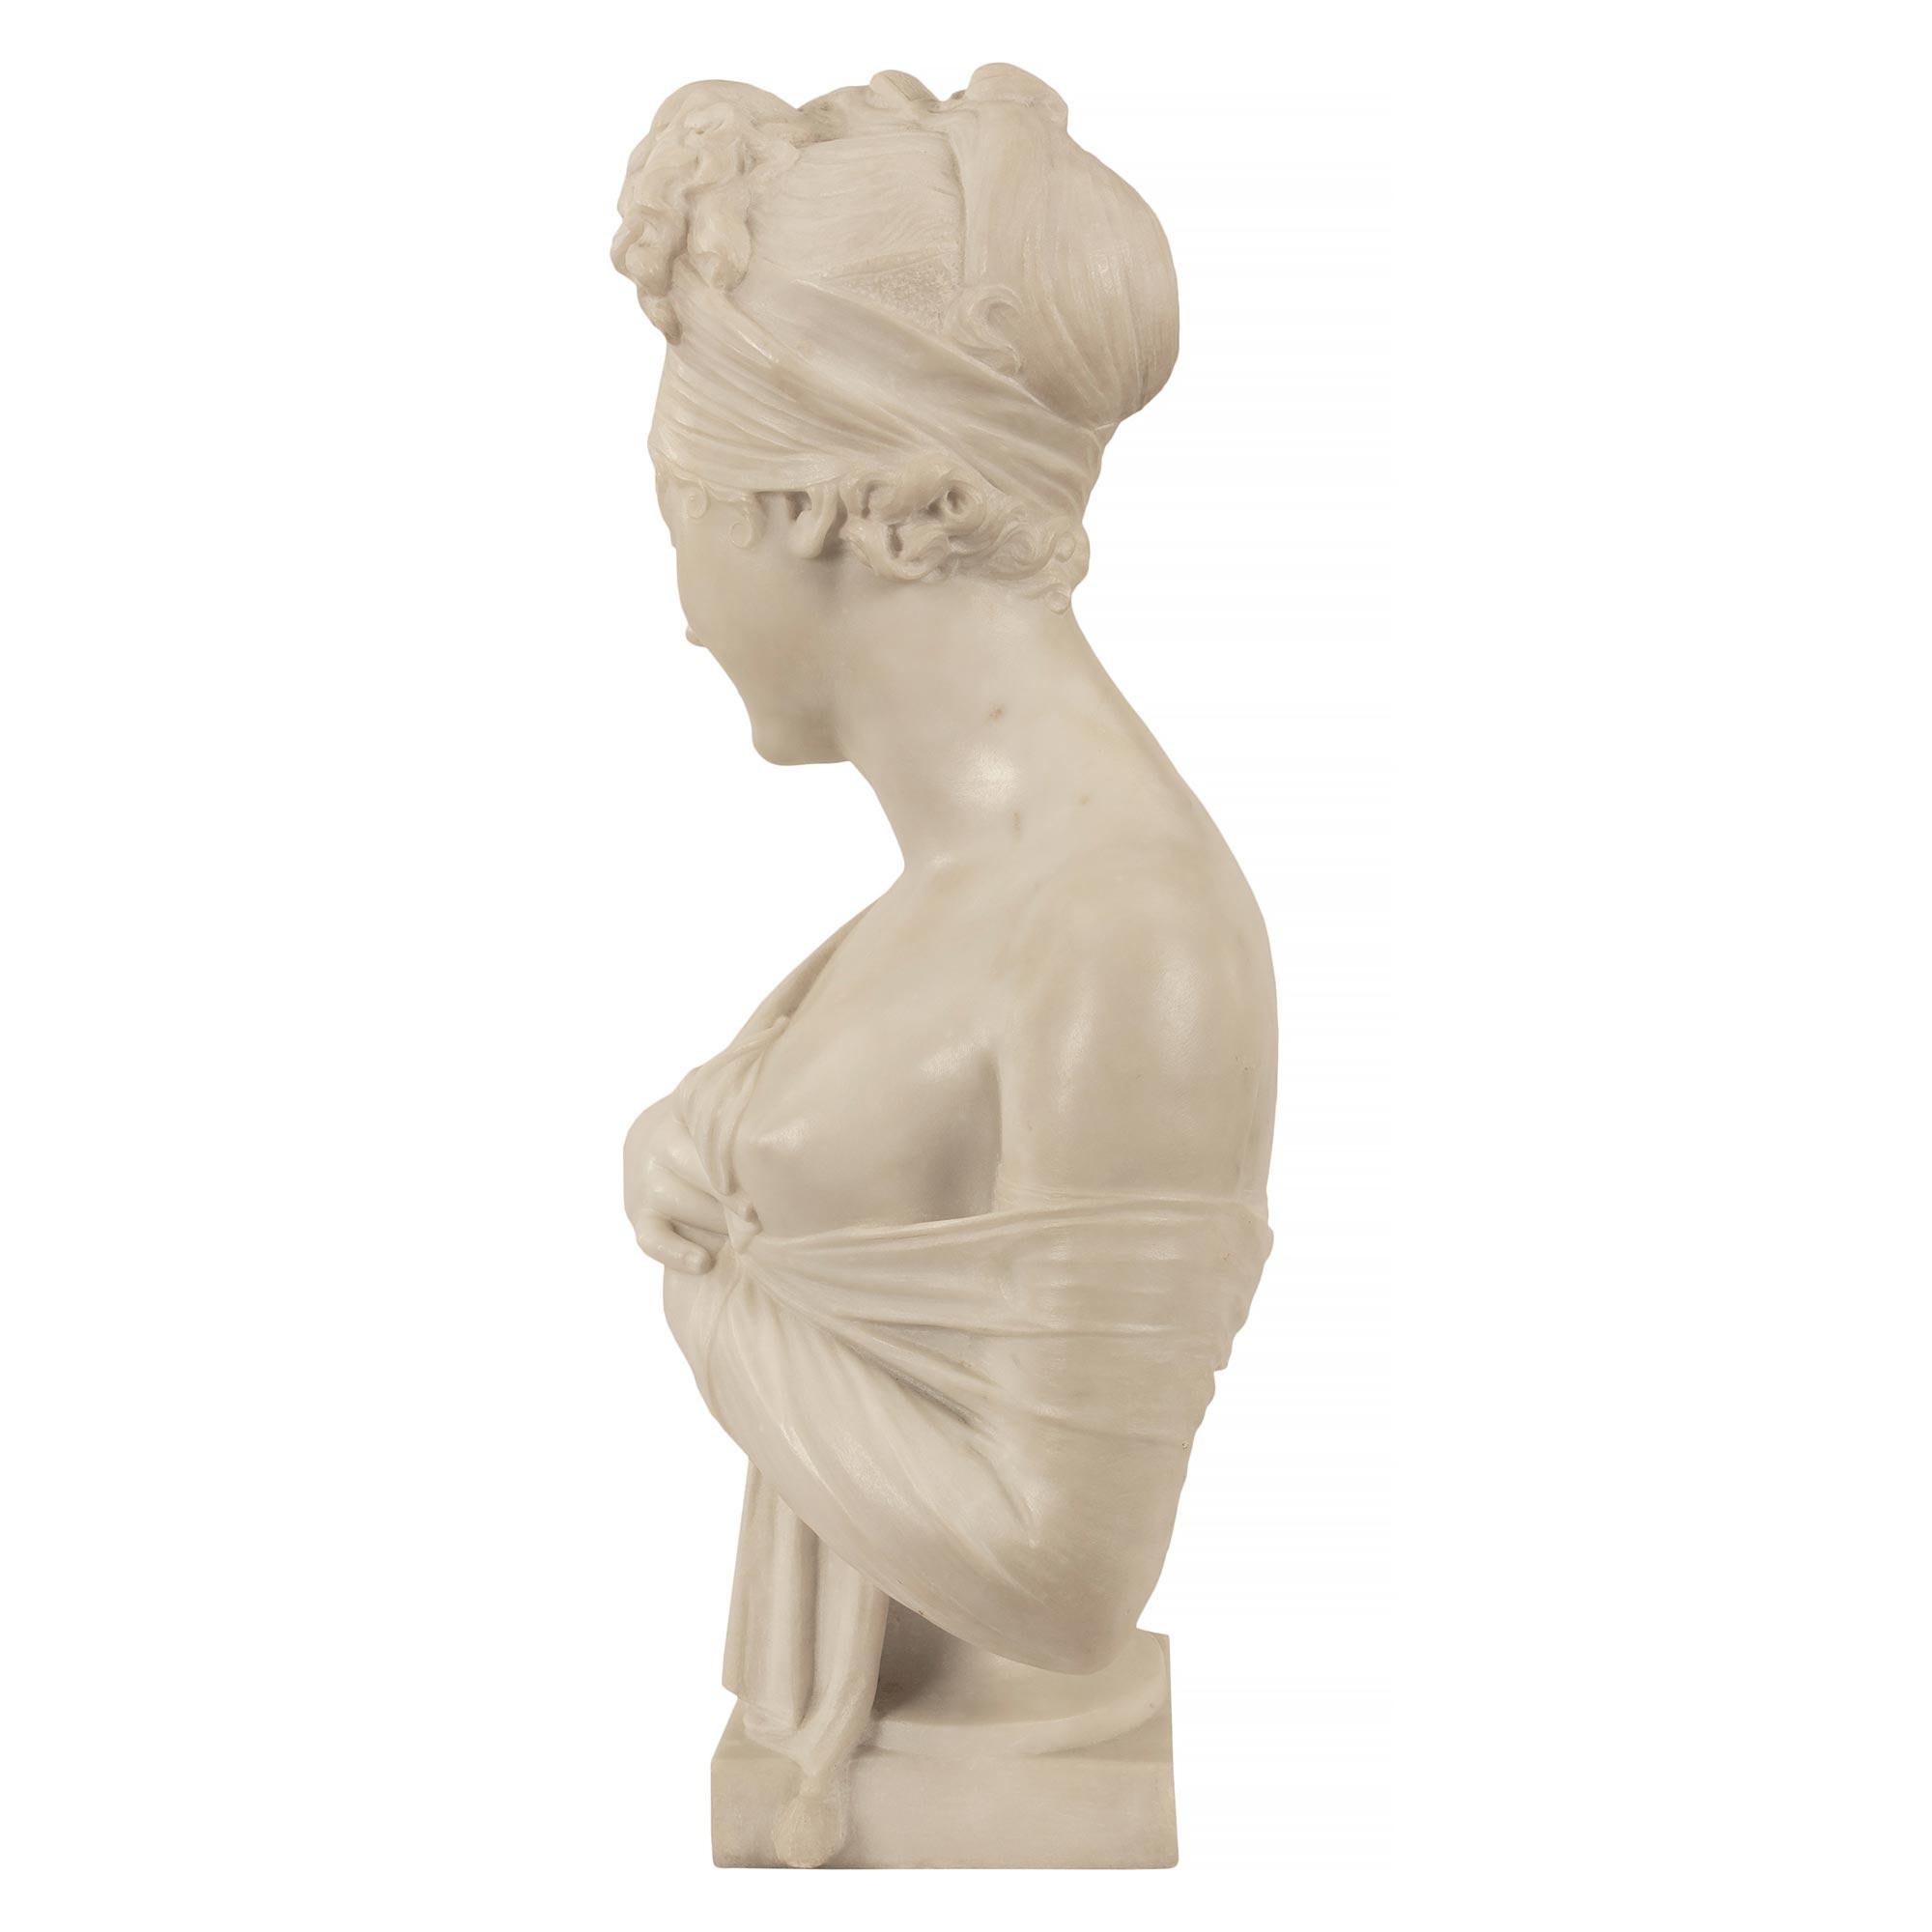 Italian 19th Century Neoclassical St. Carrara Marble Bust of Juliette Recamier For Sale 3